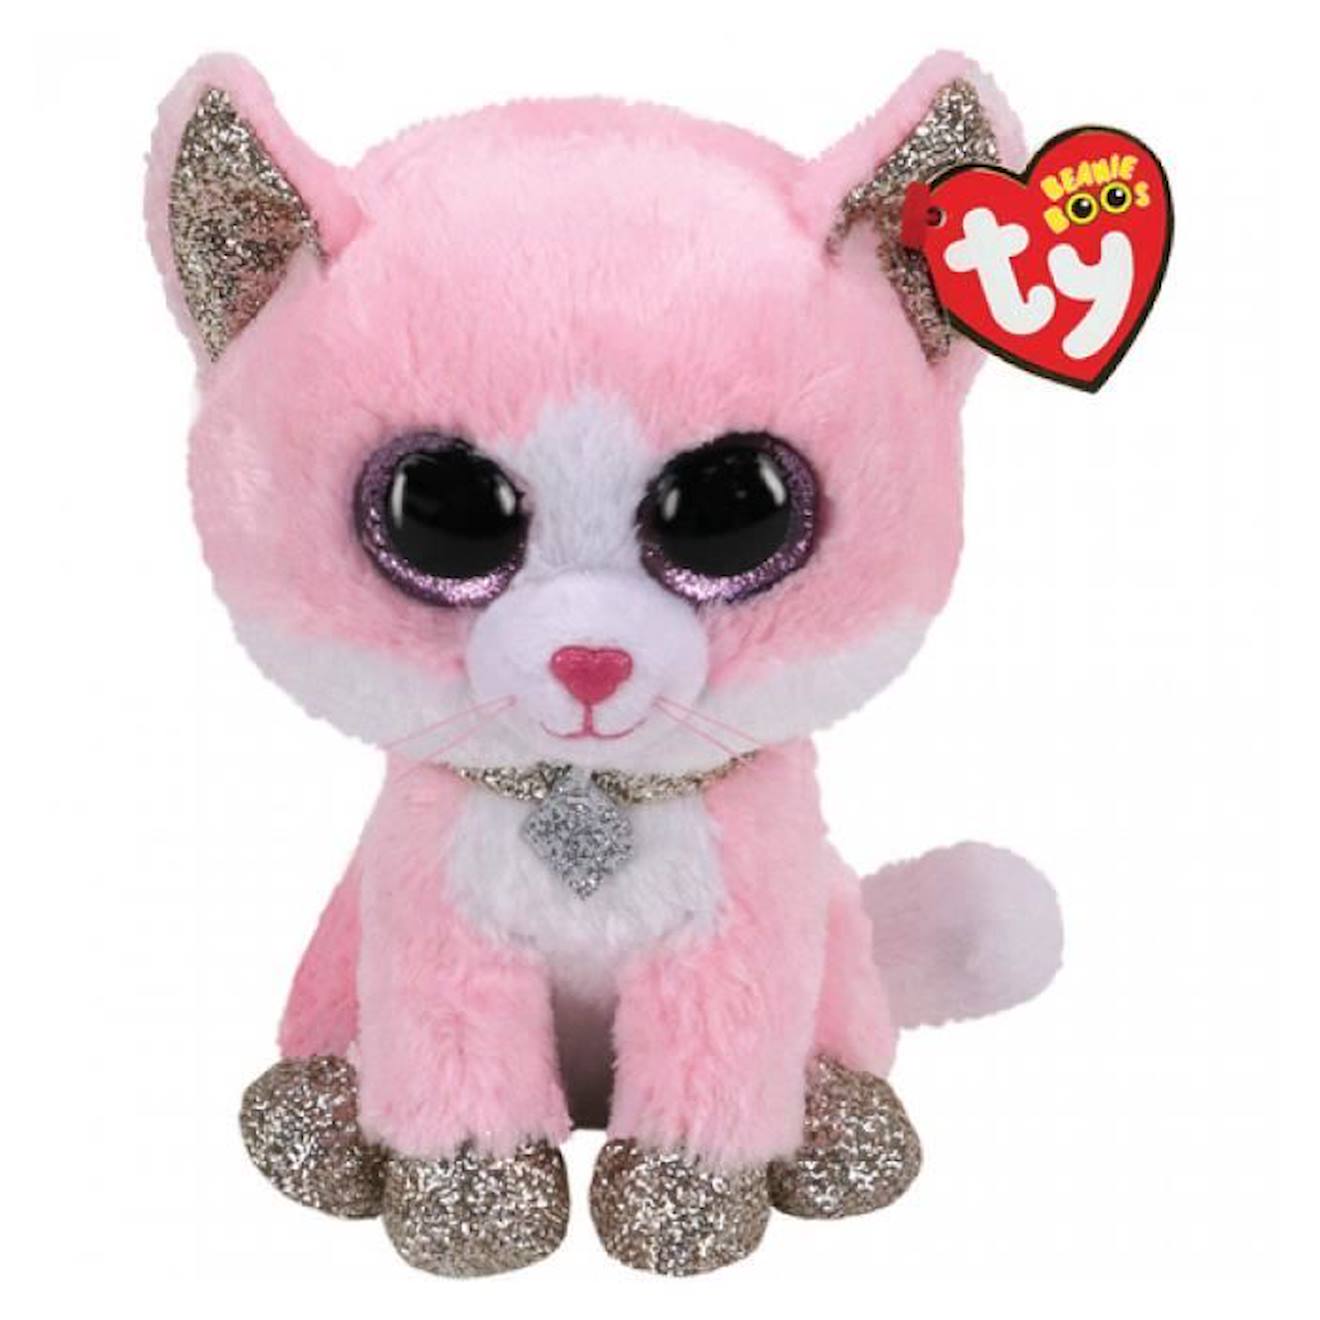 Ty - Beanie Boos Fiona / Porte Clef Chat Rouge